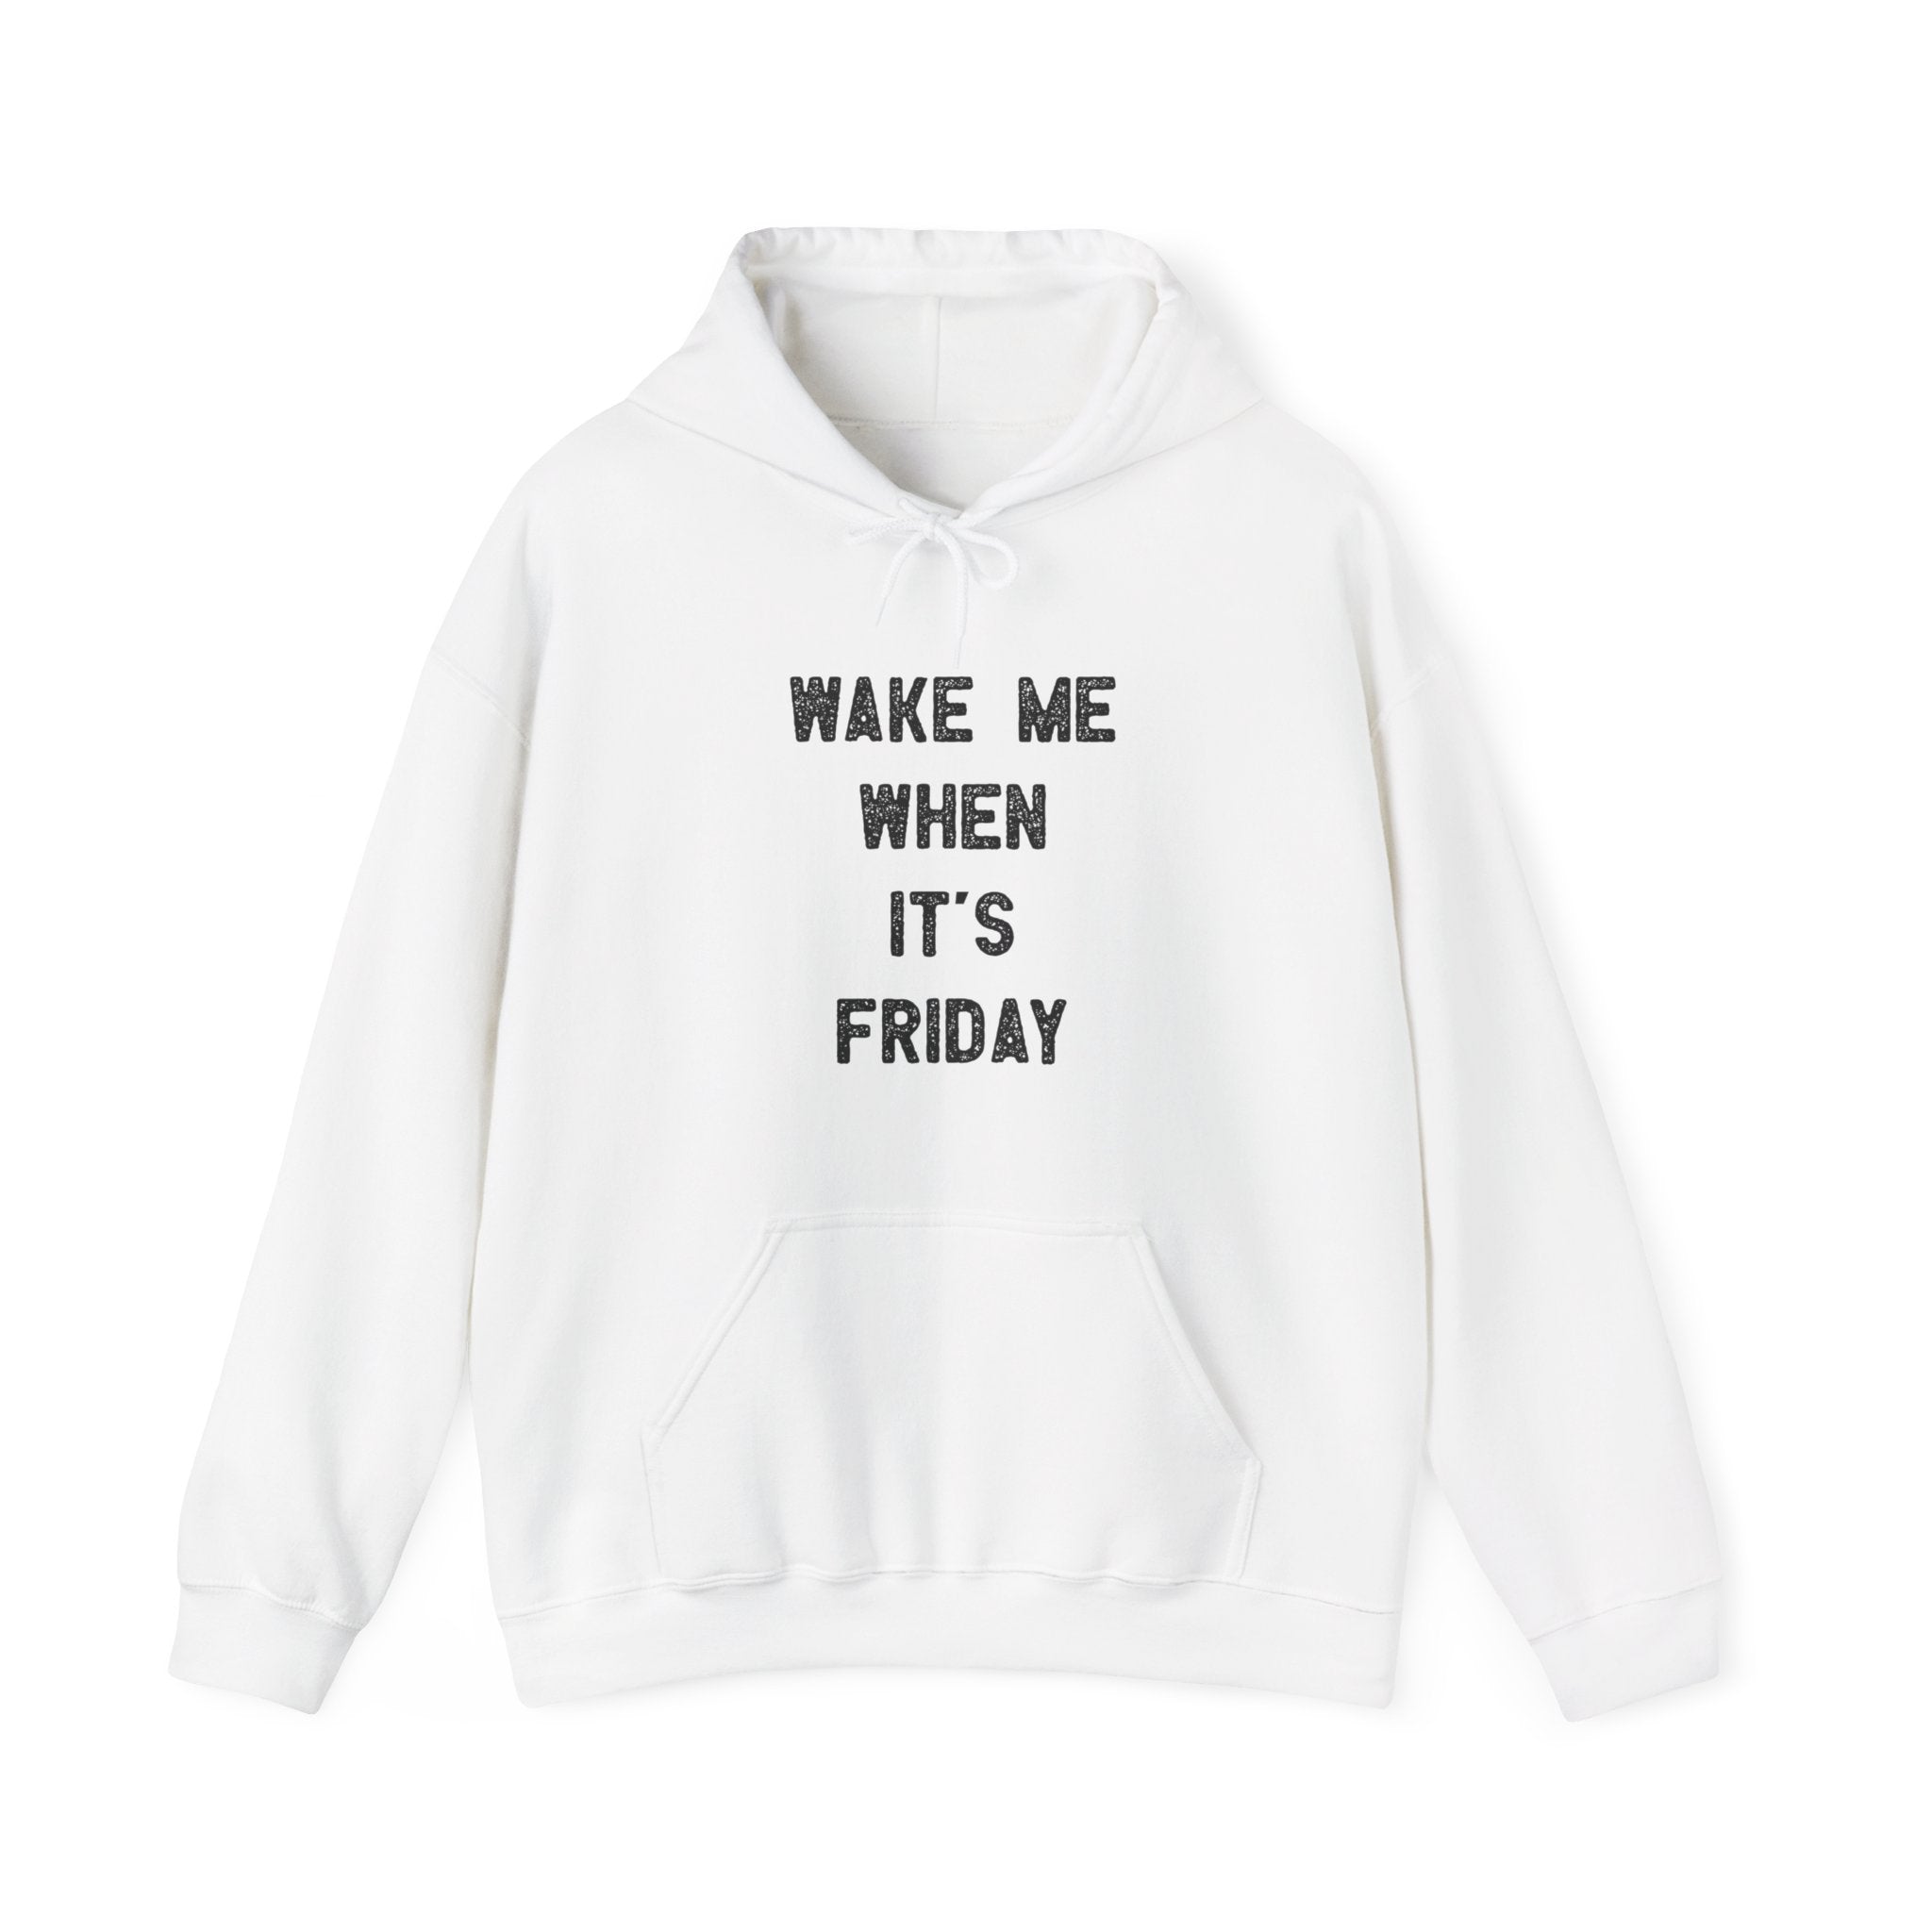 A comfortable white **Wake Me When It's Friday - Hooded Sweatshirt** with the text "WAKE ME WHEN IT'S FRIDAY" printed in black on the front.